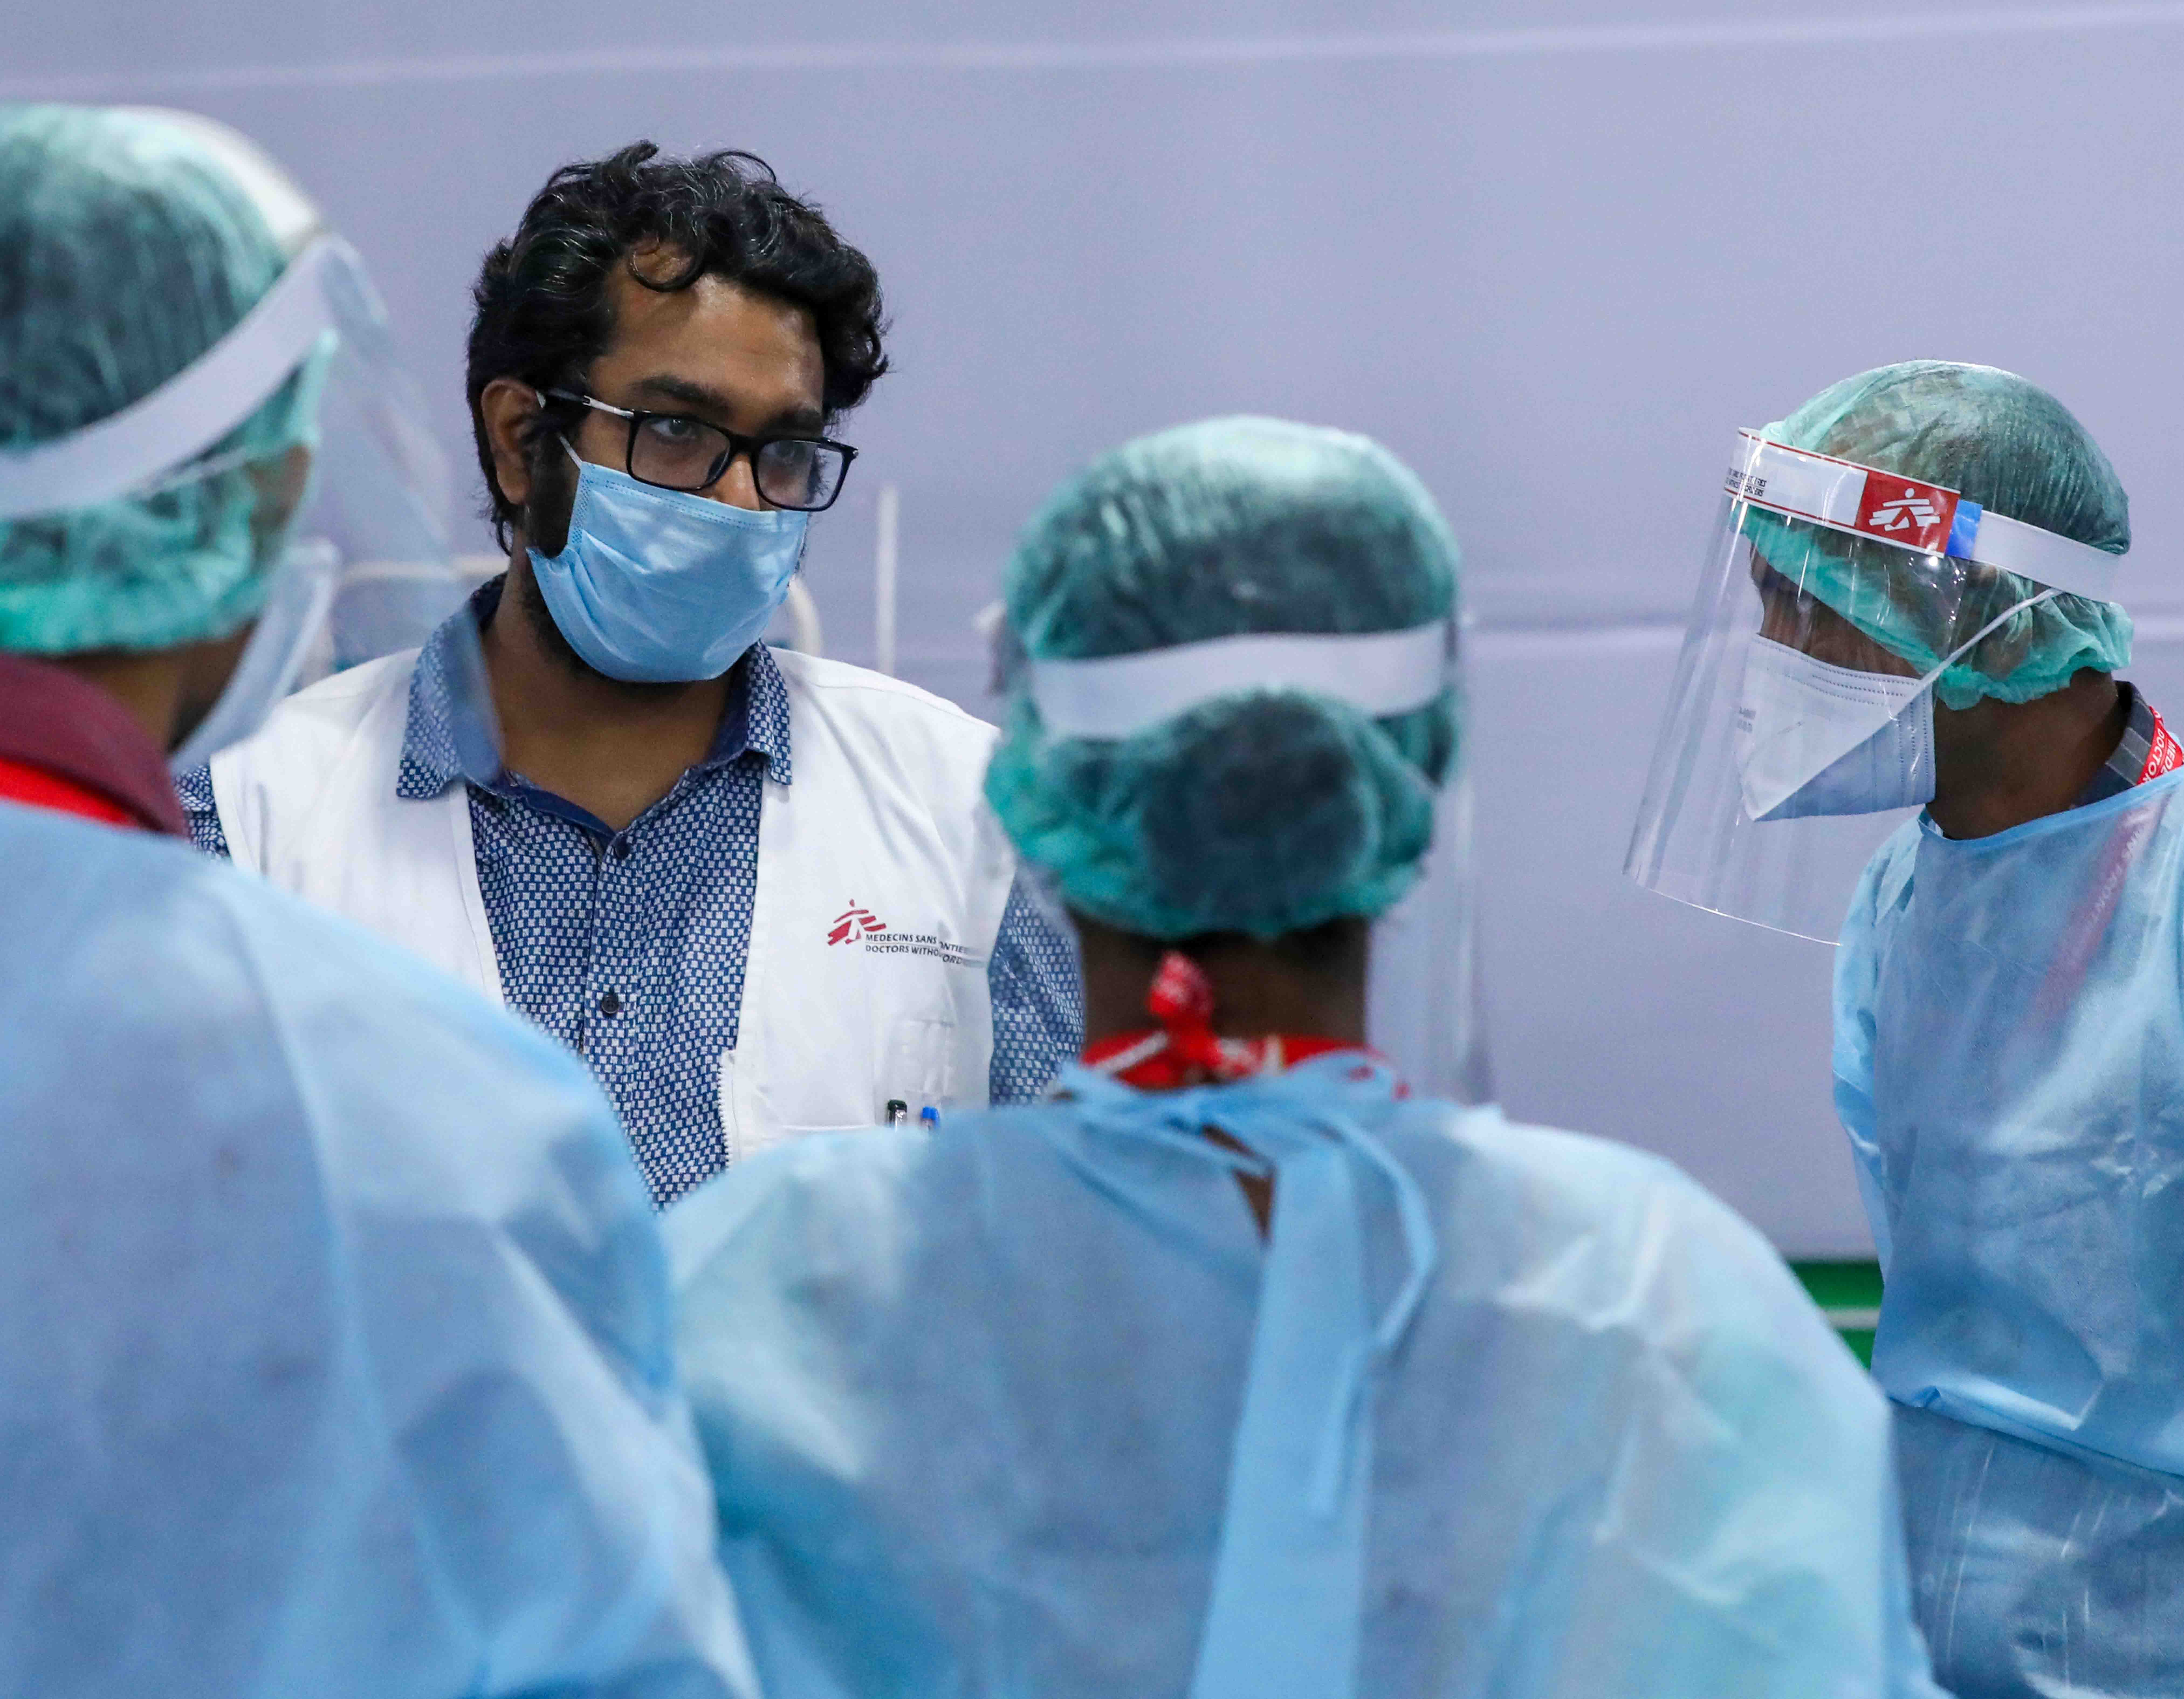 Representatives from medical teams carefully check their PPE protocols in an Indian hospital.  Photo credit: Aahana Dhar/Médecins Sans Frontières.